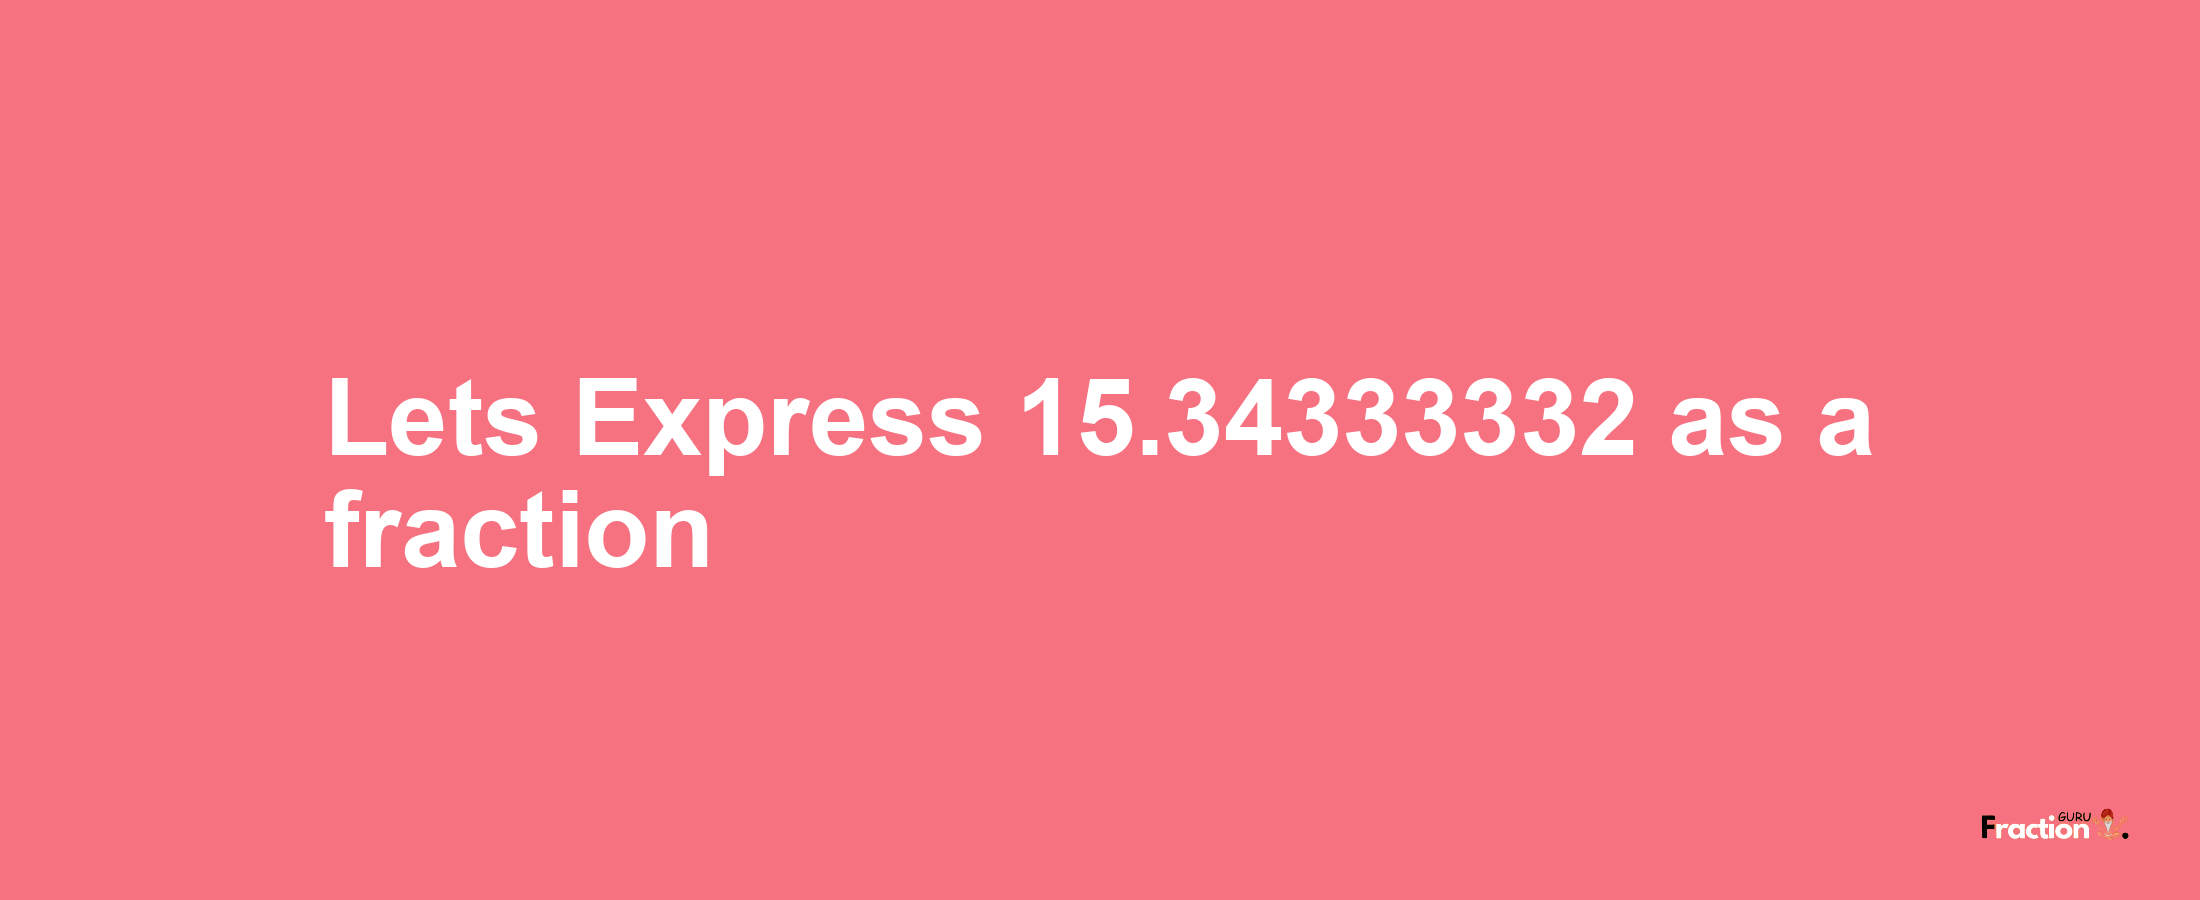 Lets Express 15.34333332 as afraction